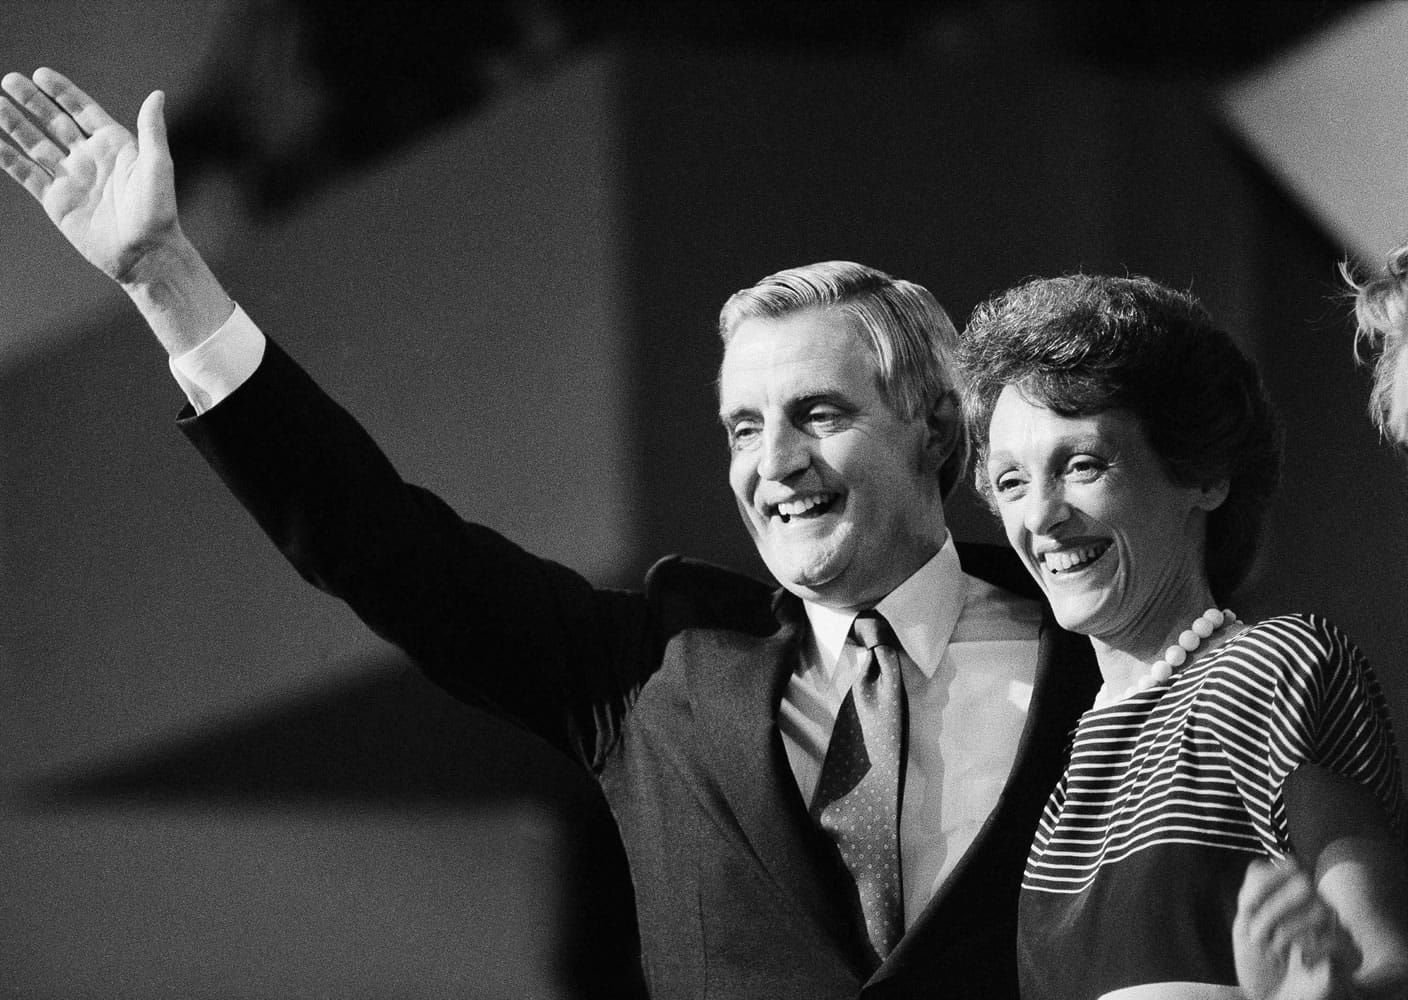 Then Democratic presidential nominee Walter Mondale and his wife, Joan, smile broadly as they thank the delegates from the podium following Mondale's nomination in San Francisco on July 19, 1984. Joan Mondale, who burnished a reputation as &quot;Joan of Art&quot; for her passionate advocacy for the arts while her husband was vice president and a U.S. ambassador, died Monday.